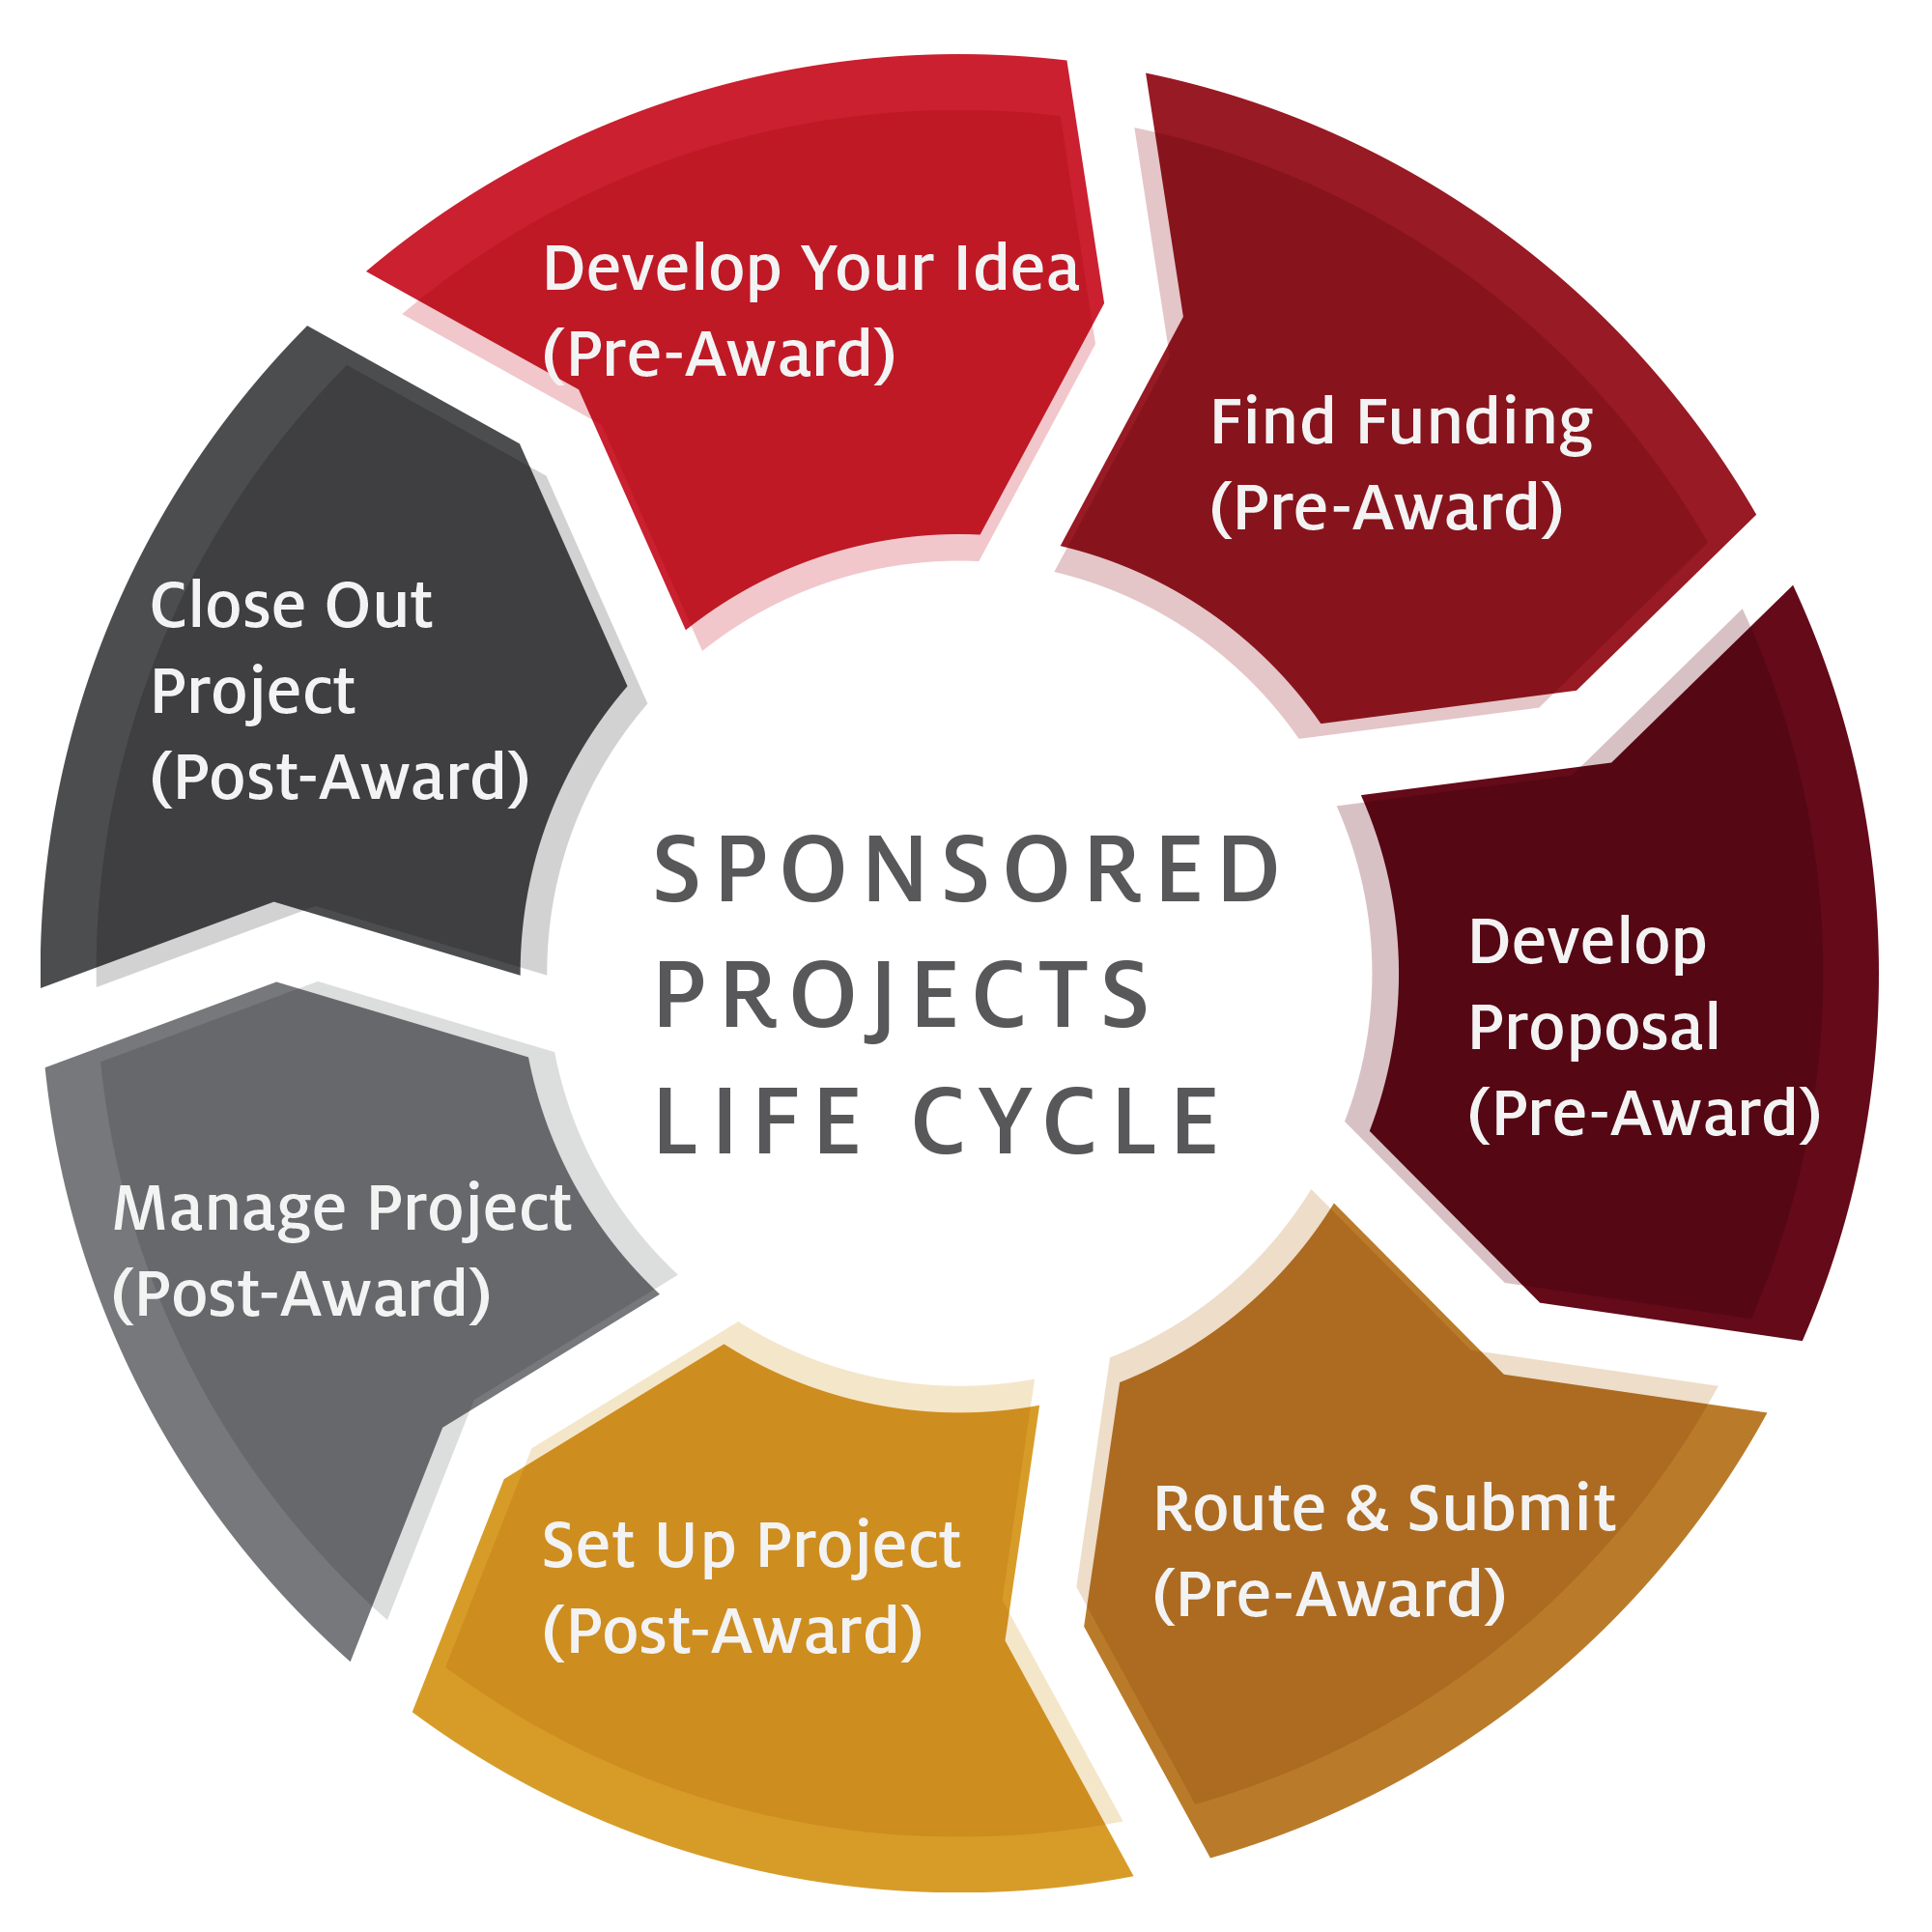 Sponsored Projects Life Cycle chart